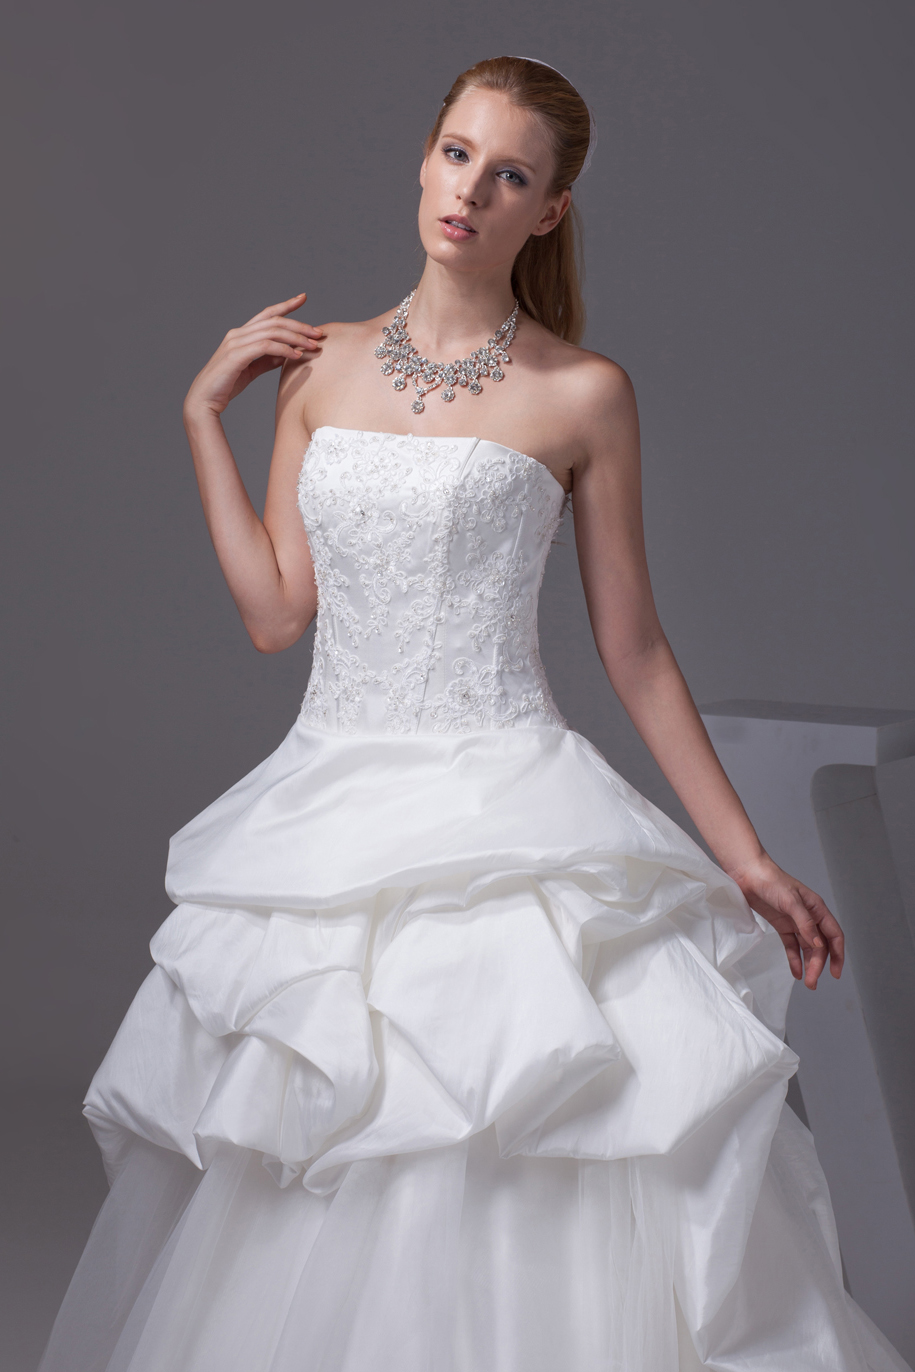 Appliques With Beading Strapless Pick-ups Wedding Dress